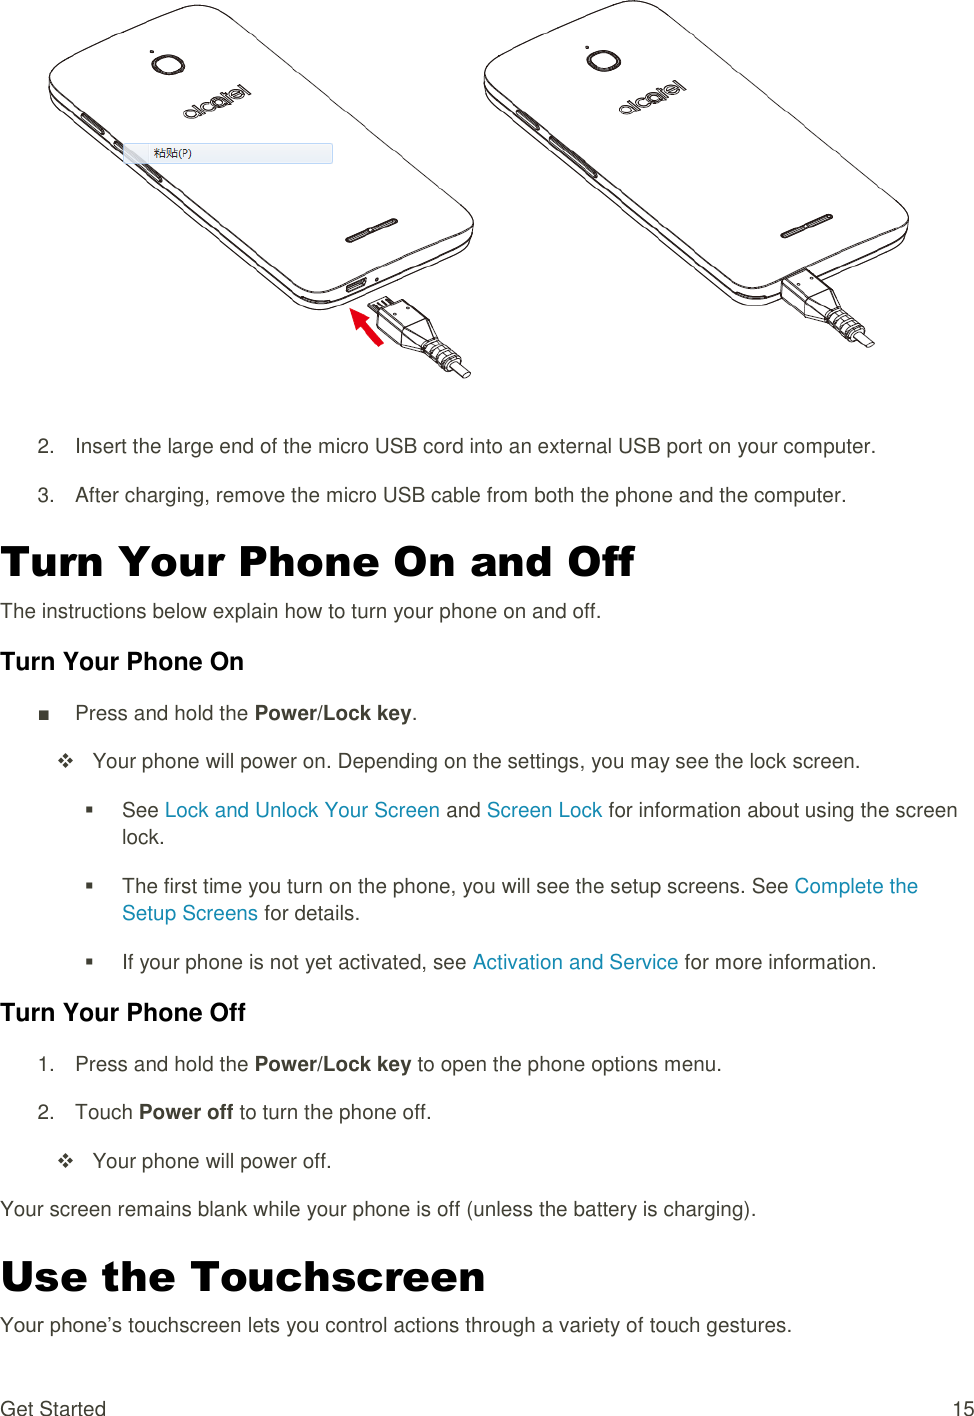 Get Started  15   2.  Insert the large end of the micro USB cord into an external USB port on your computer. 3.  After charging, remove the micro USB cable from both the phone and the computer. Turn Your Phone On and Off The instructions below explain how to turn your phone on and off. Turn Your Phone On ■  Press and hold the Power/Lock key.     Your phone will power on. Depending on the settings, you may see the lock screen.   See Lock and Unlock Your Screen and Screen Lock for information about using the screen lock.   The first time you turn on the phone, you will see the setup screens. See Complete the Setup Screens for details.   If your phone is not yet activated, see Activation and Service for more information. Turn Your Phone Off 1.  Press and hold the Power/Lock key to open the phone options menu.  2.  Touch Power off to turn the phone off.     Your phone will power off. Your screen remains blank while your phone is off (unless the battery is charging). Use the Touchscreen Your phone’s touchscreen lets you control actions through a variety of touch gestures. 